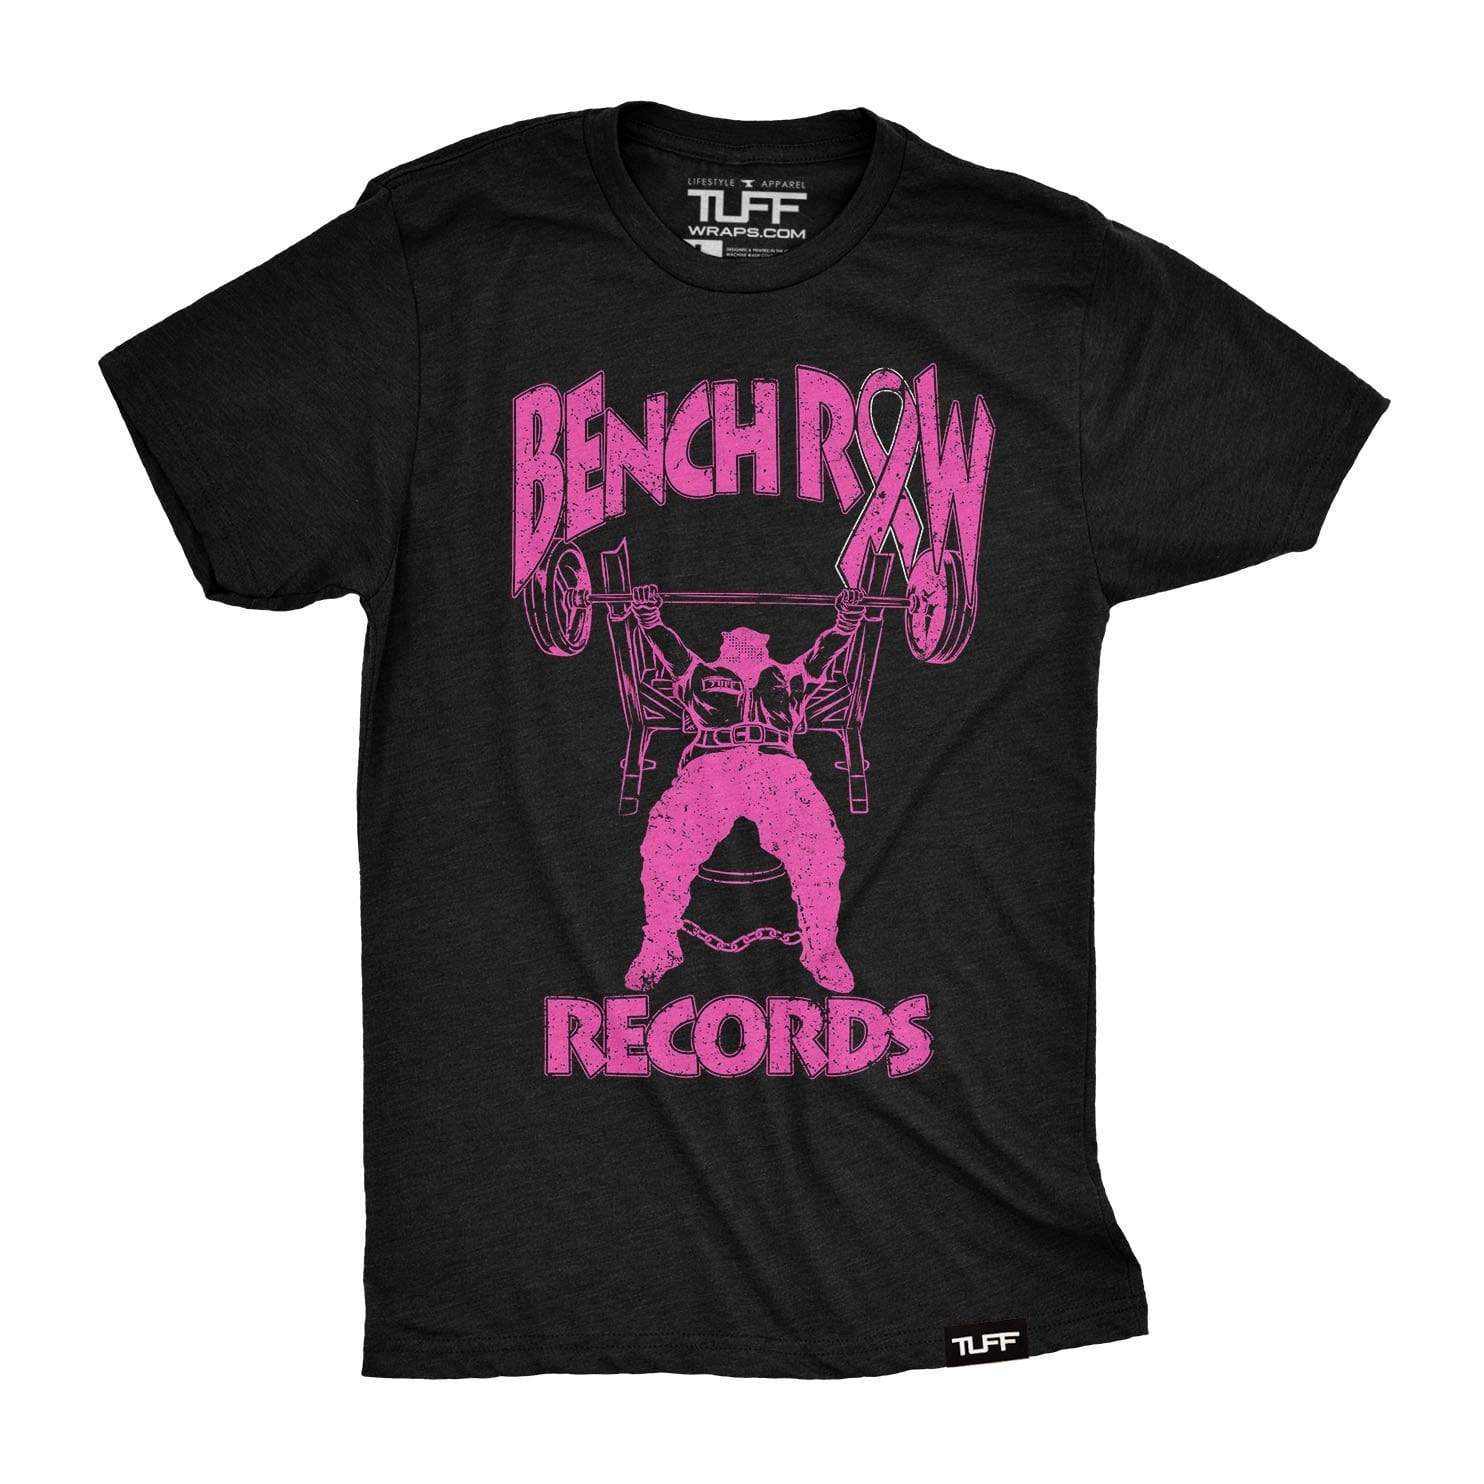 Breast Cancer Awareness Bench Row Records Tee T-shirt